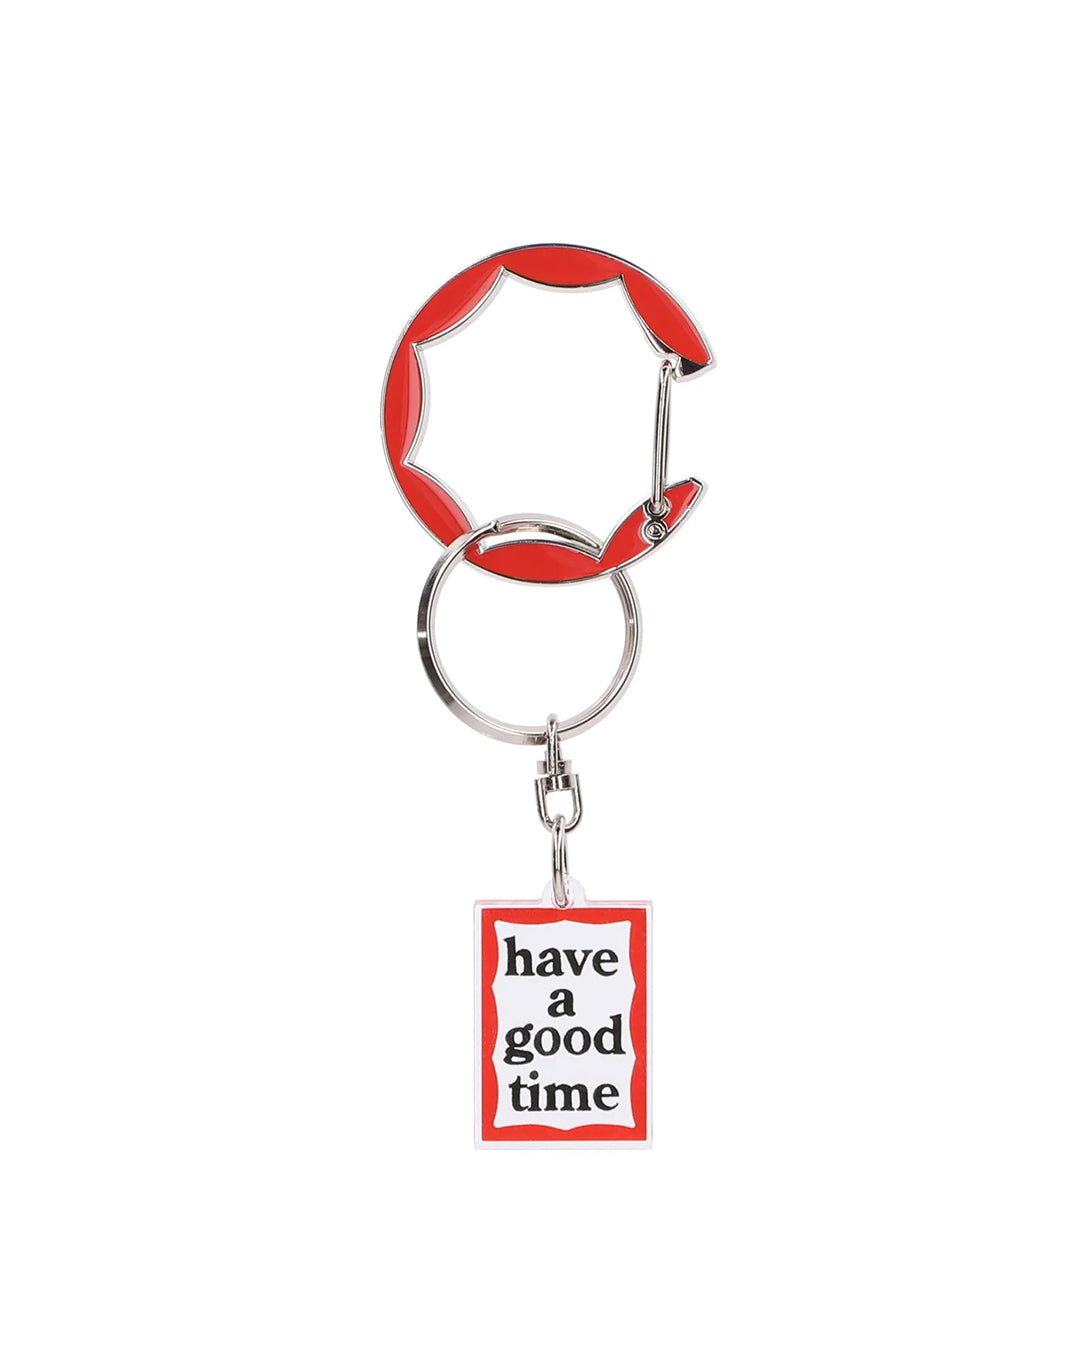 have a good time FRAME CLEAR KEYCHAIN X CIRCLE FRAME CARABINER SET